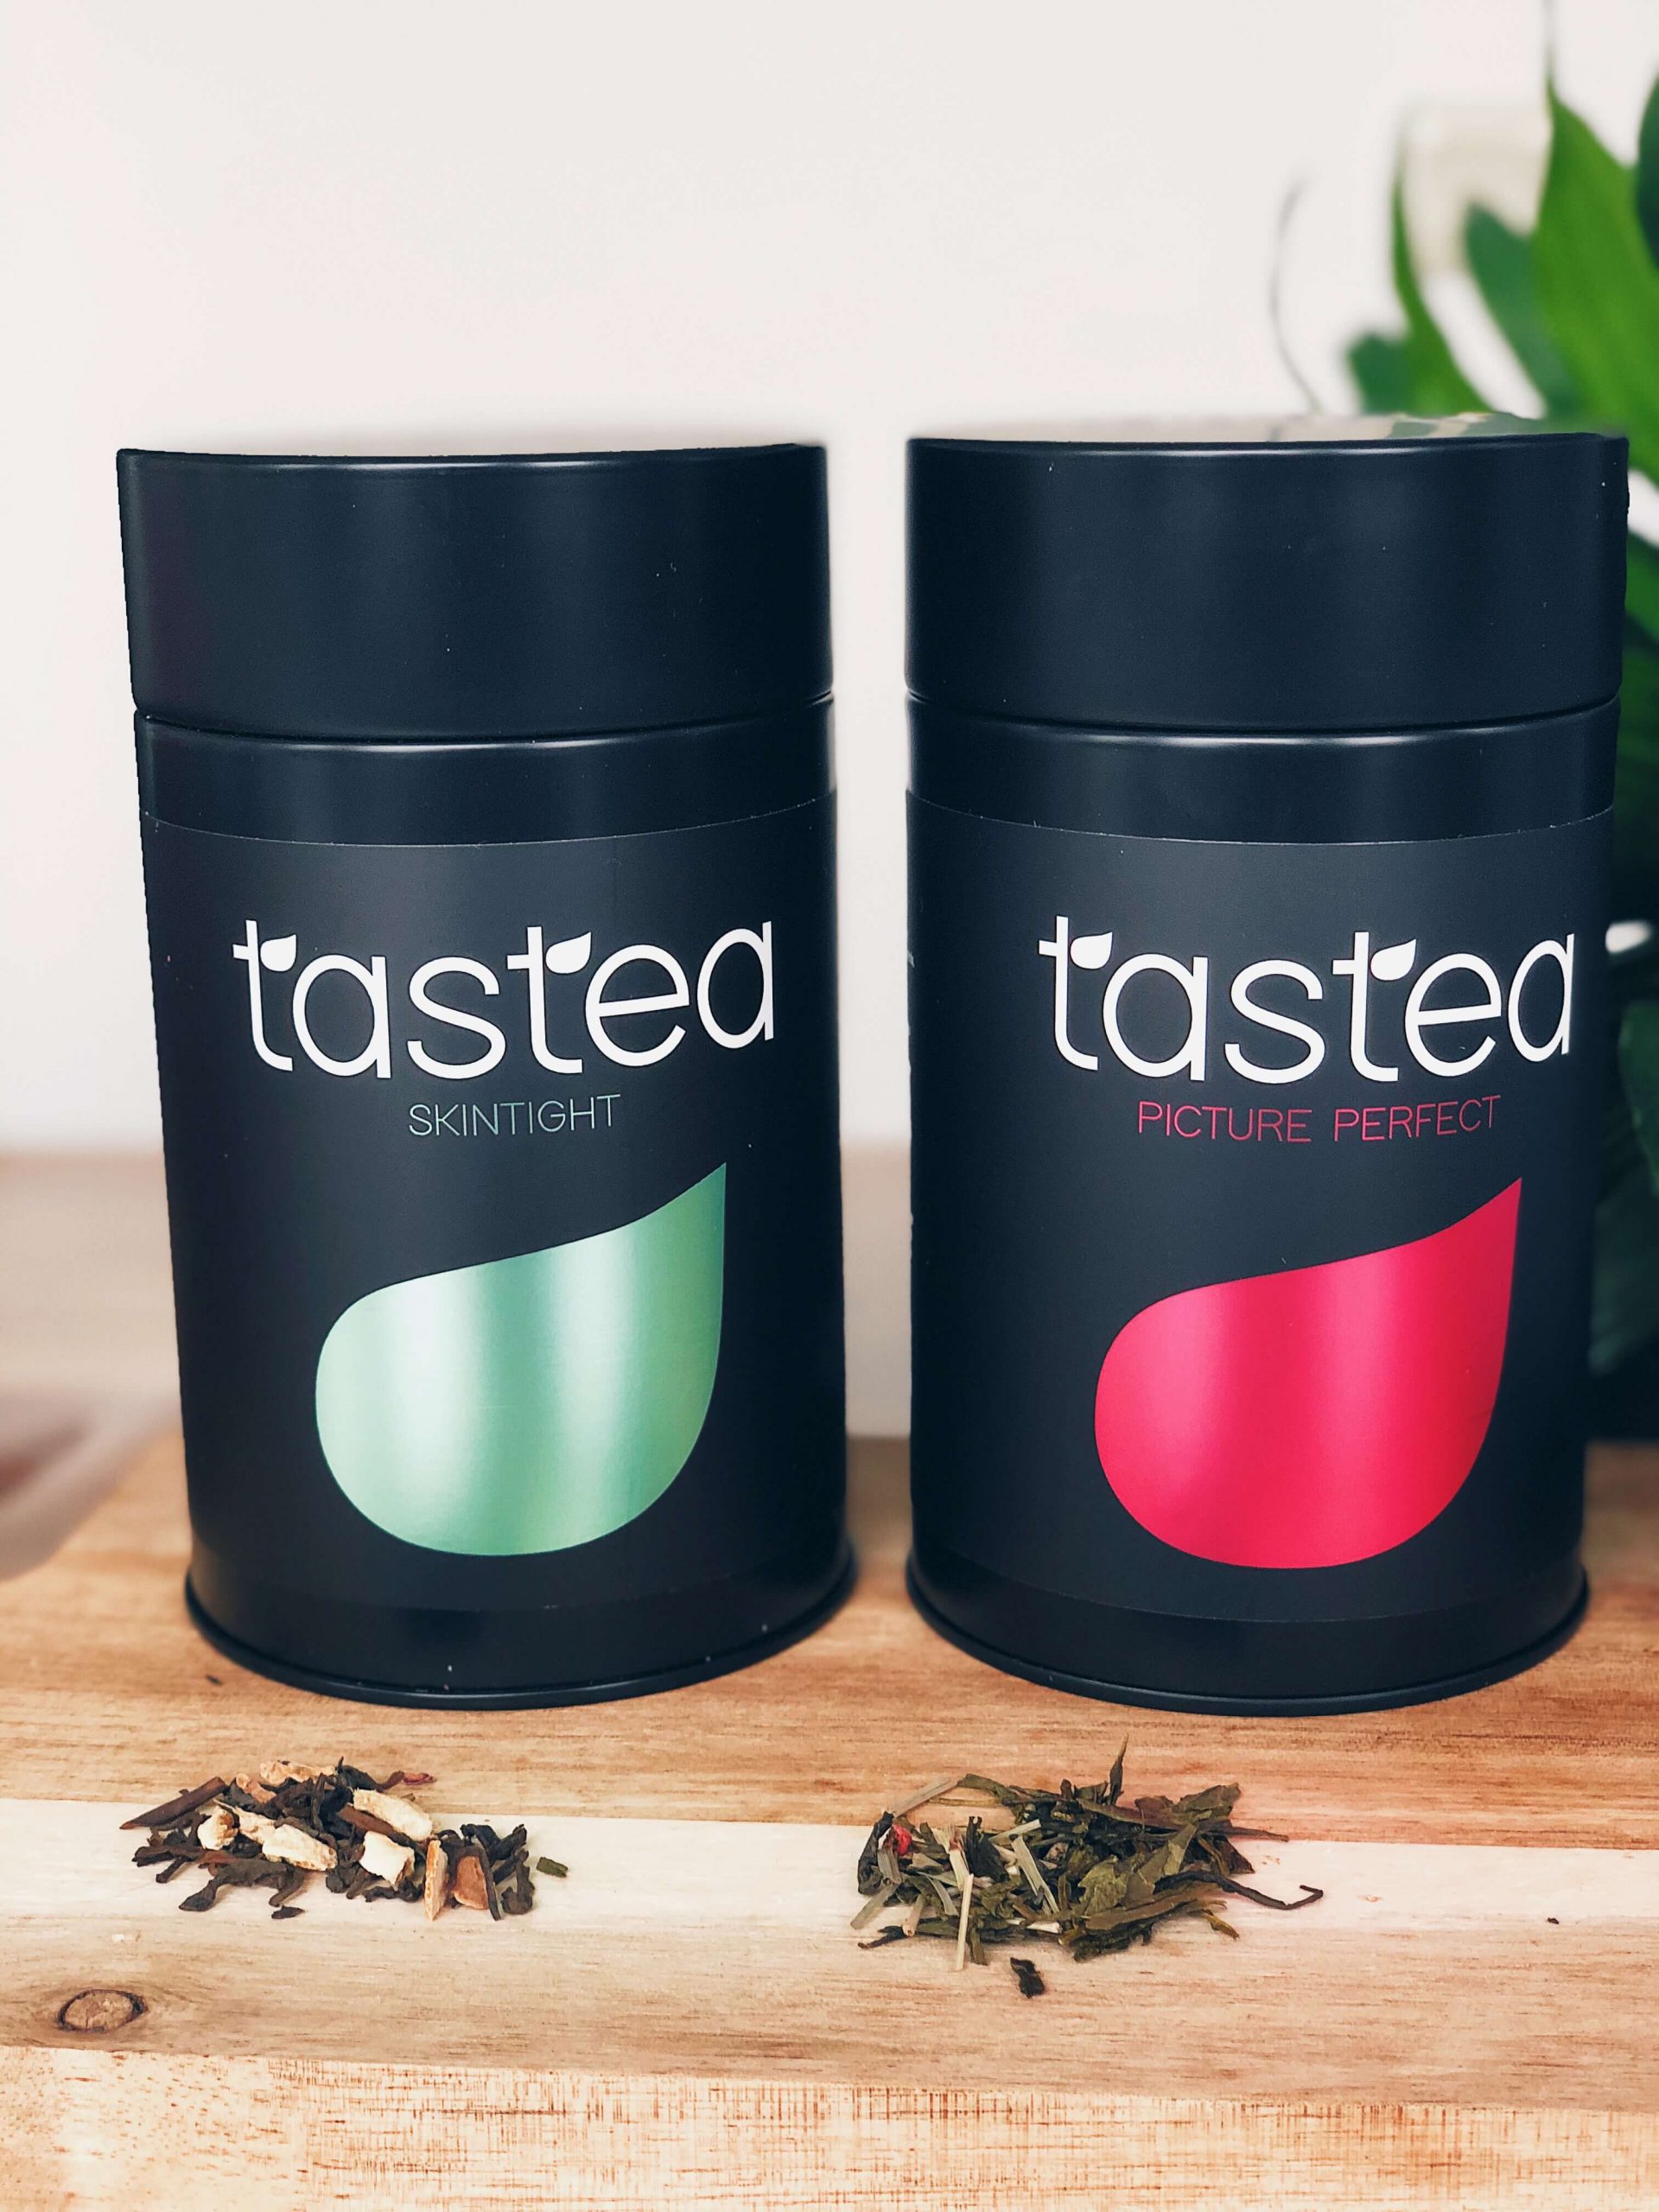 Tastea thee blends skintight en picture perfect 